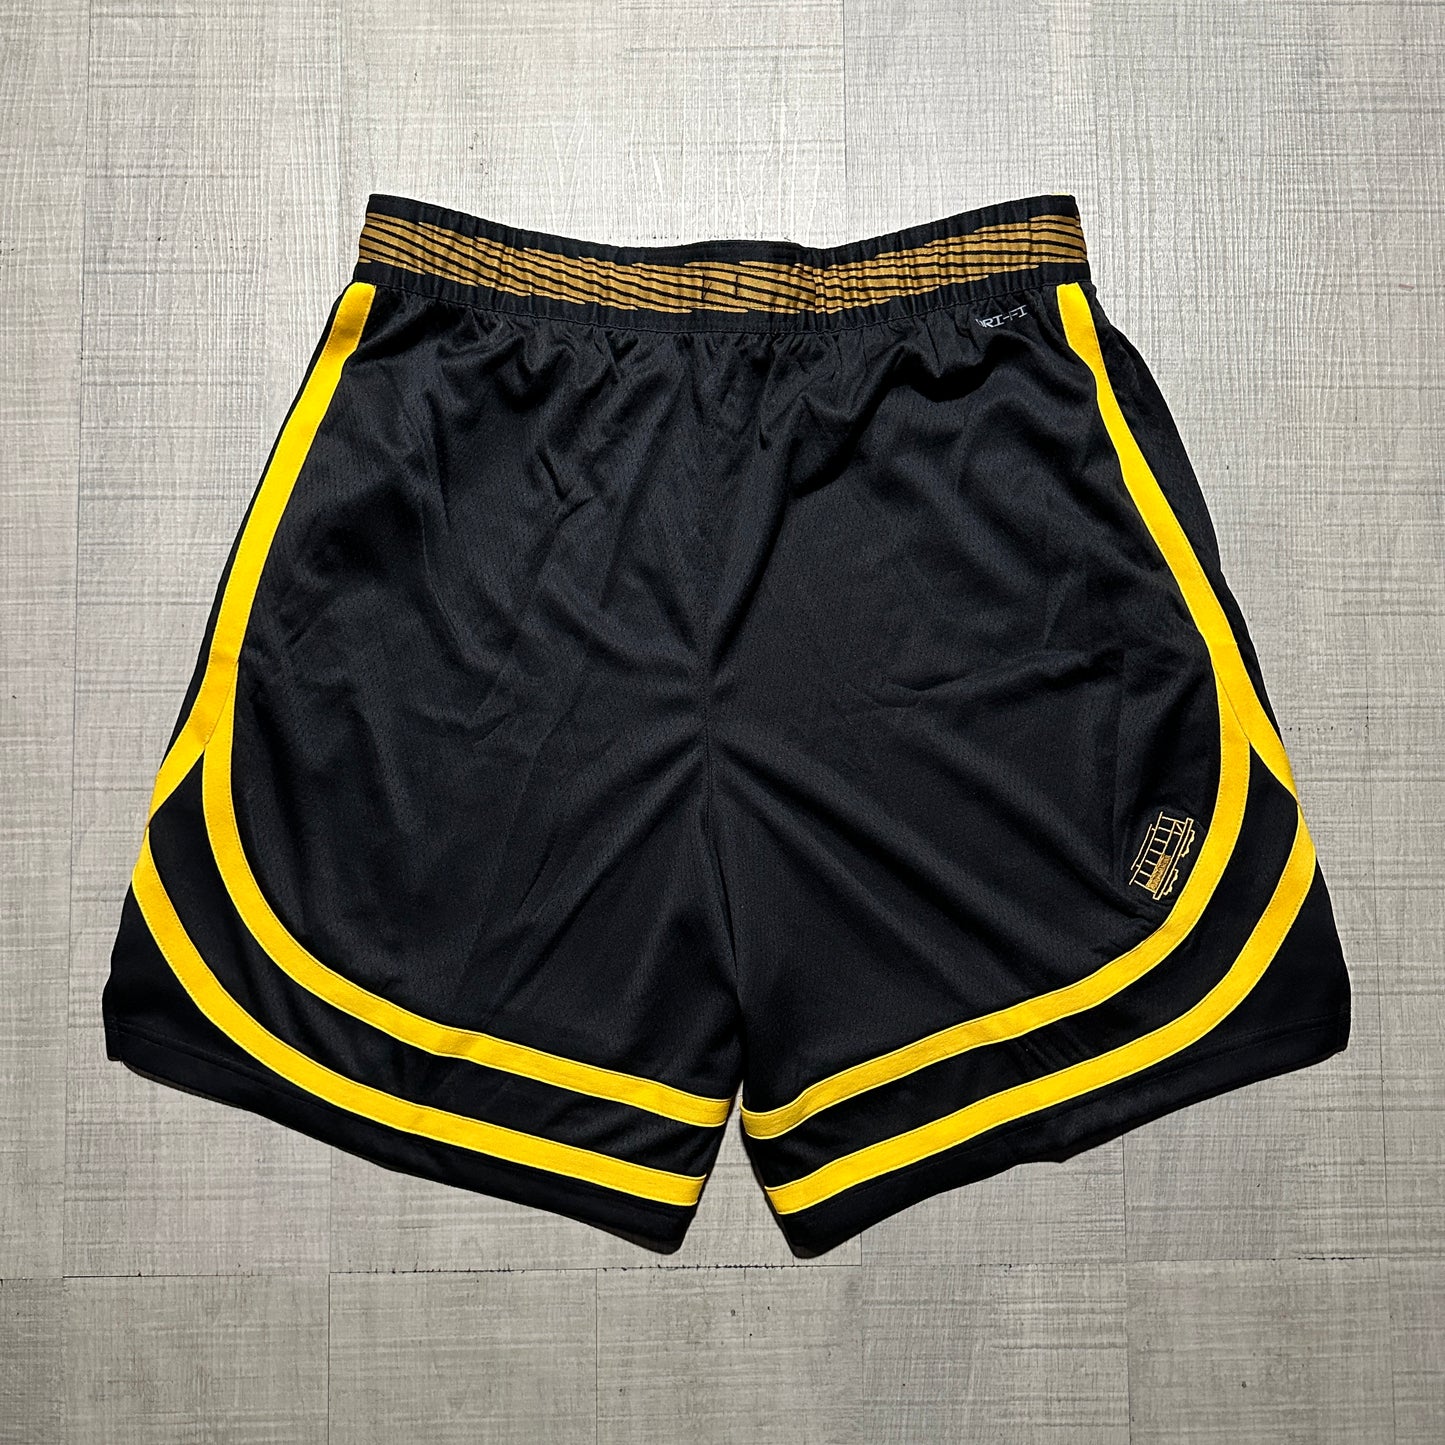 Golden State Warriors 23/24 City Edition Nike Shorts